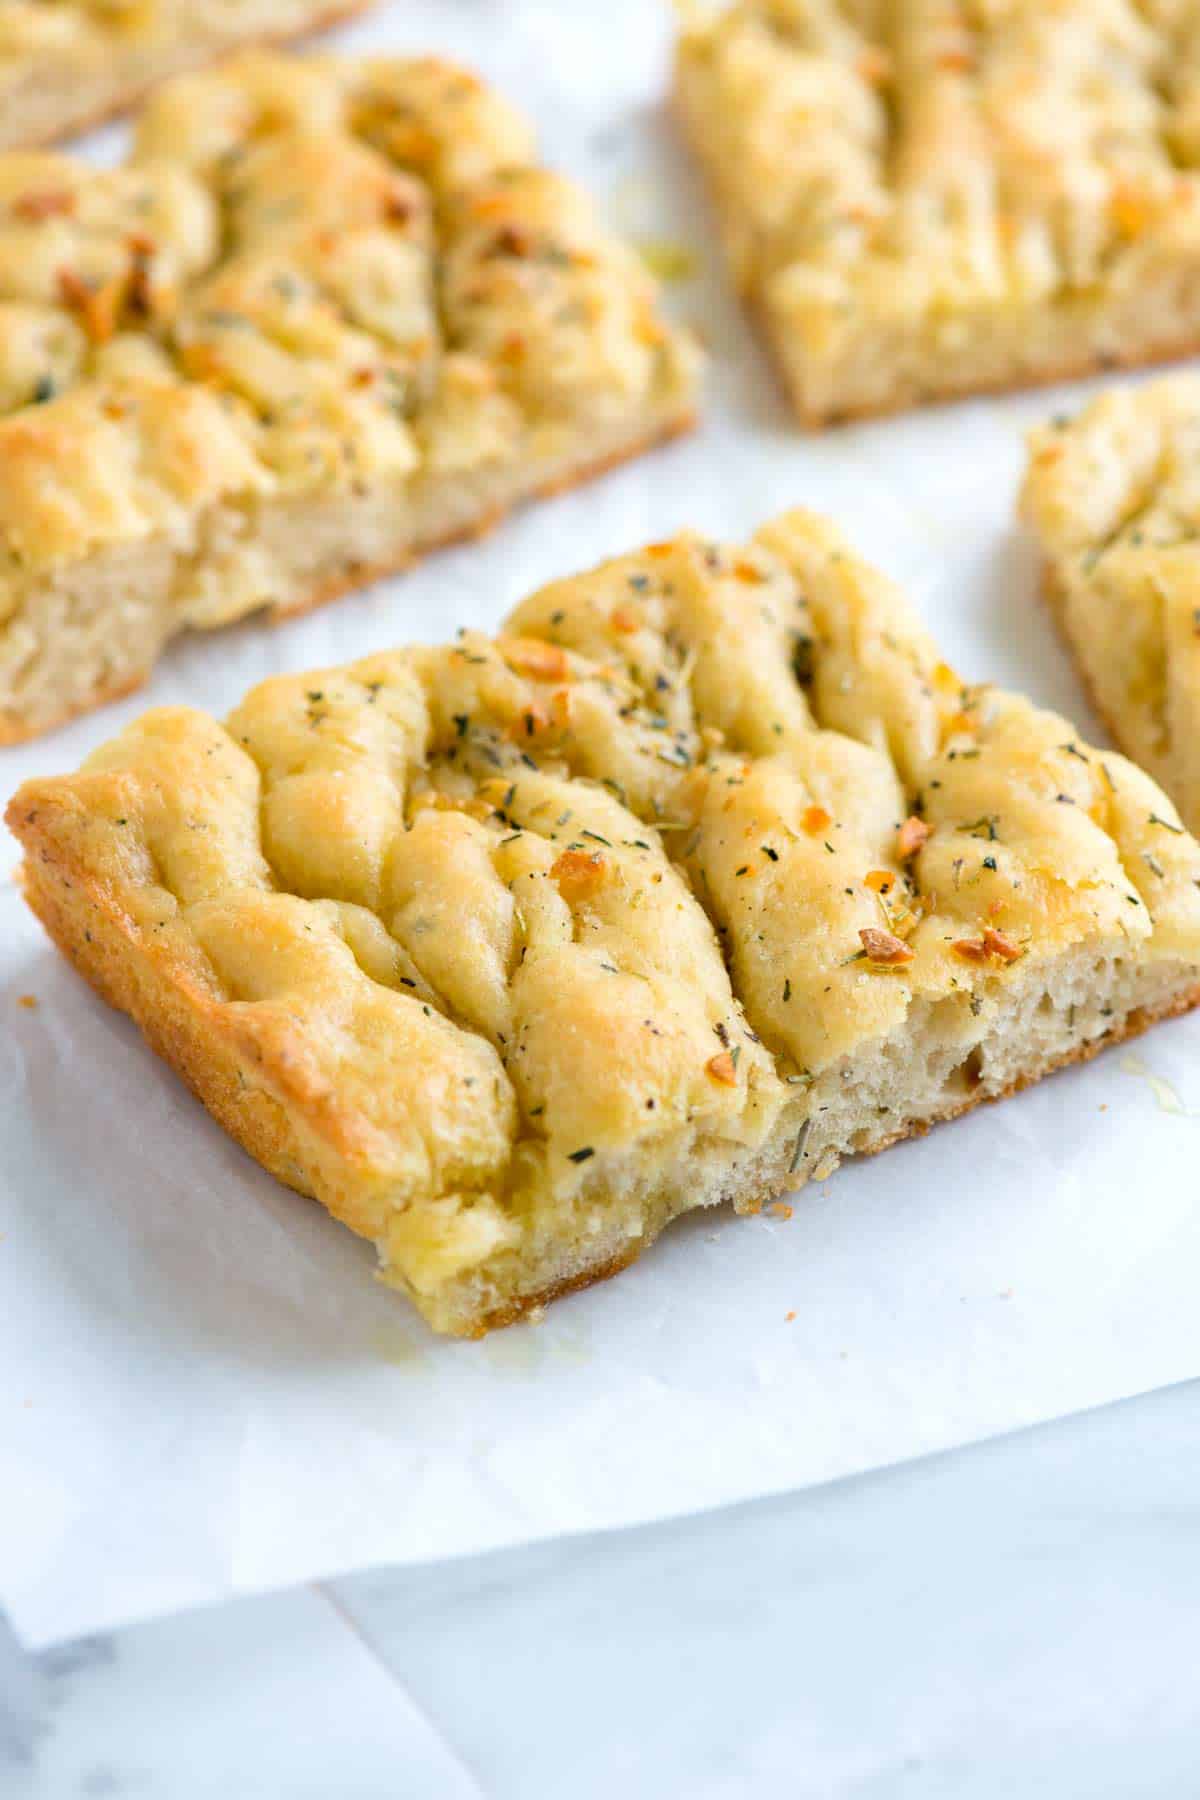 Freshly baked homemade focaccia bread with garlic and rosemary